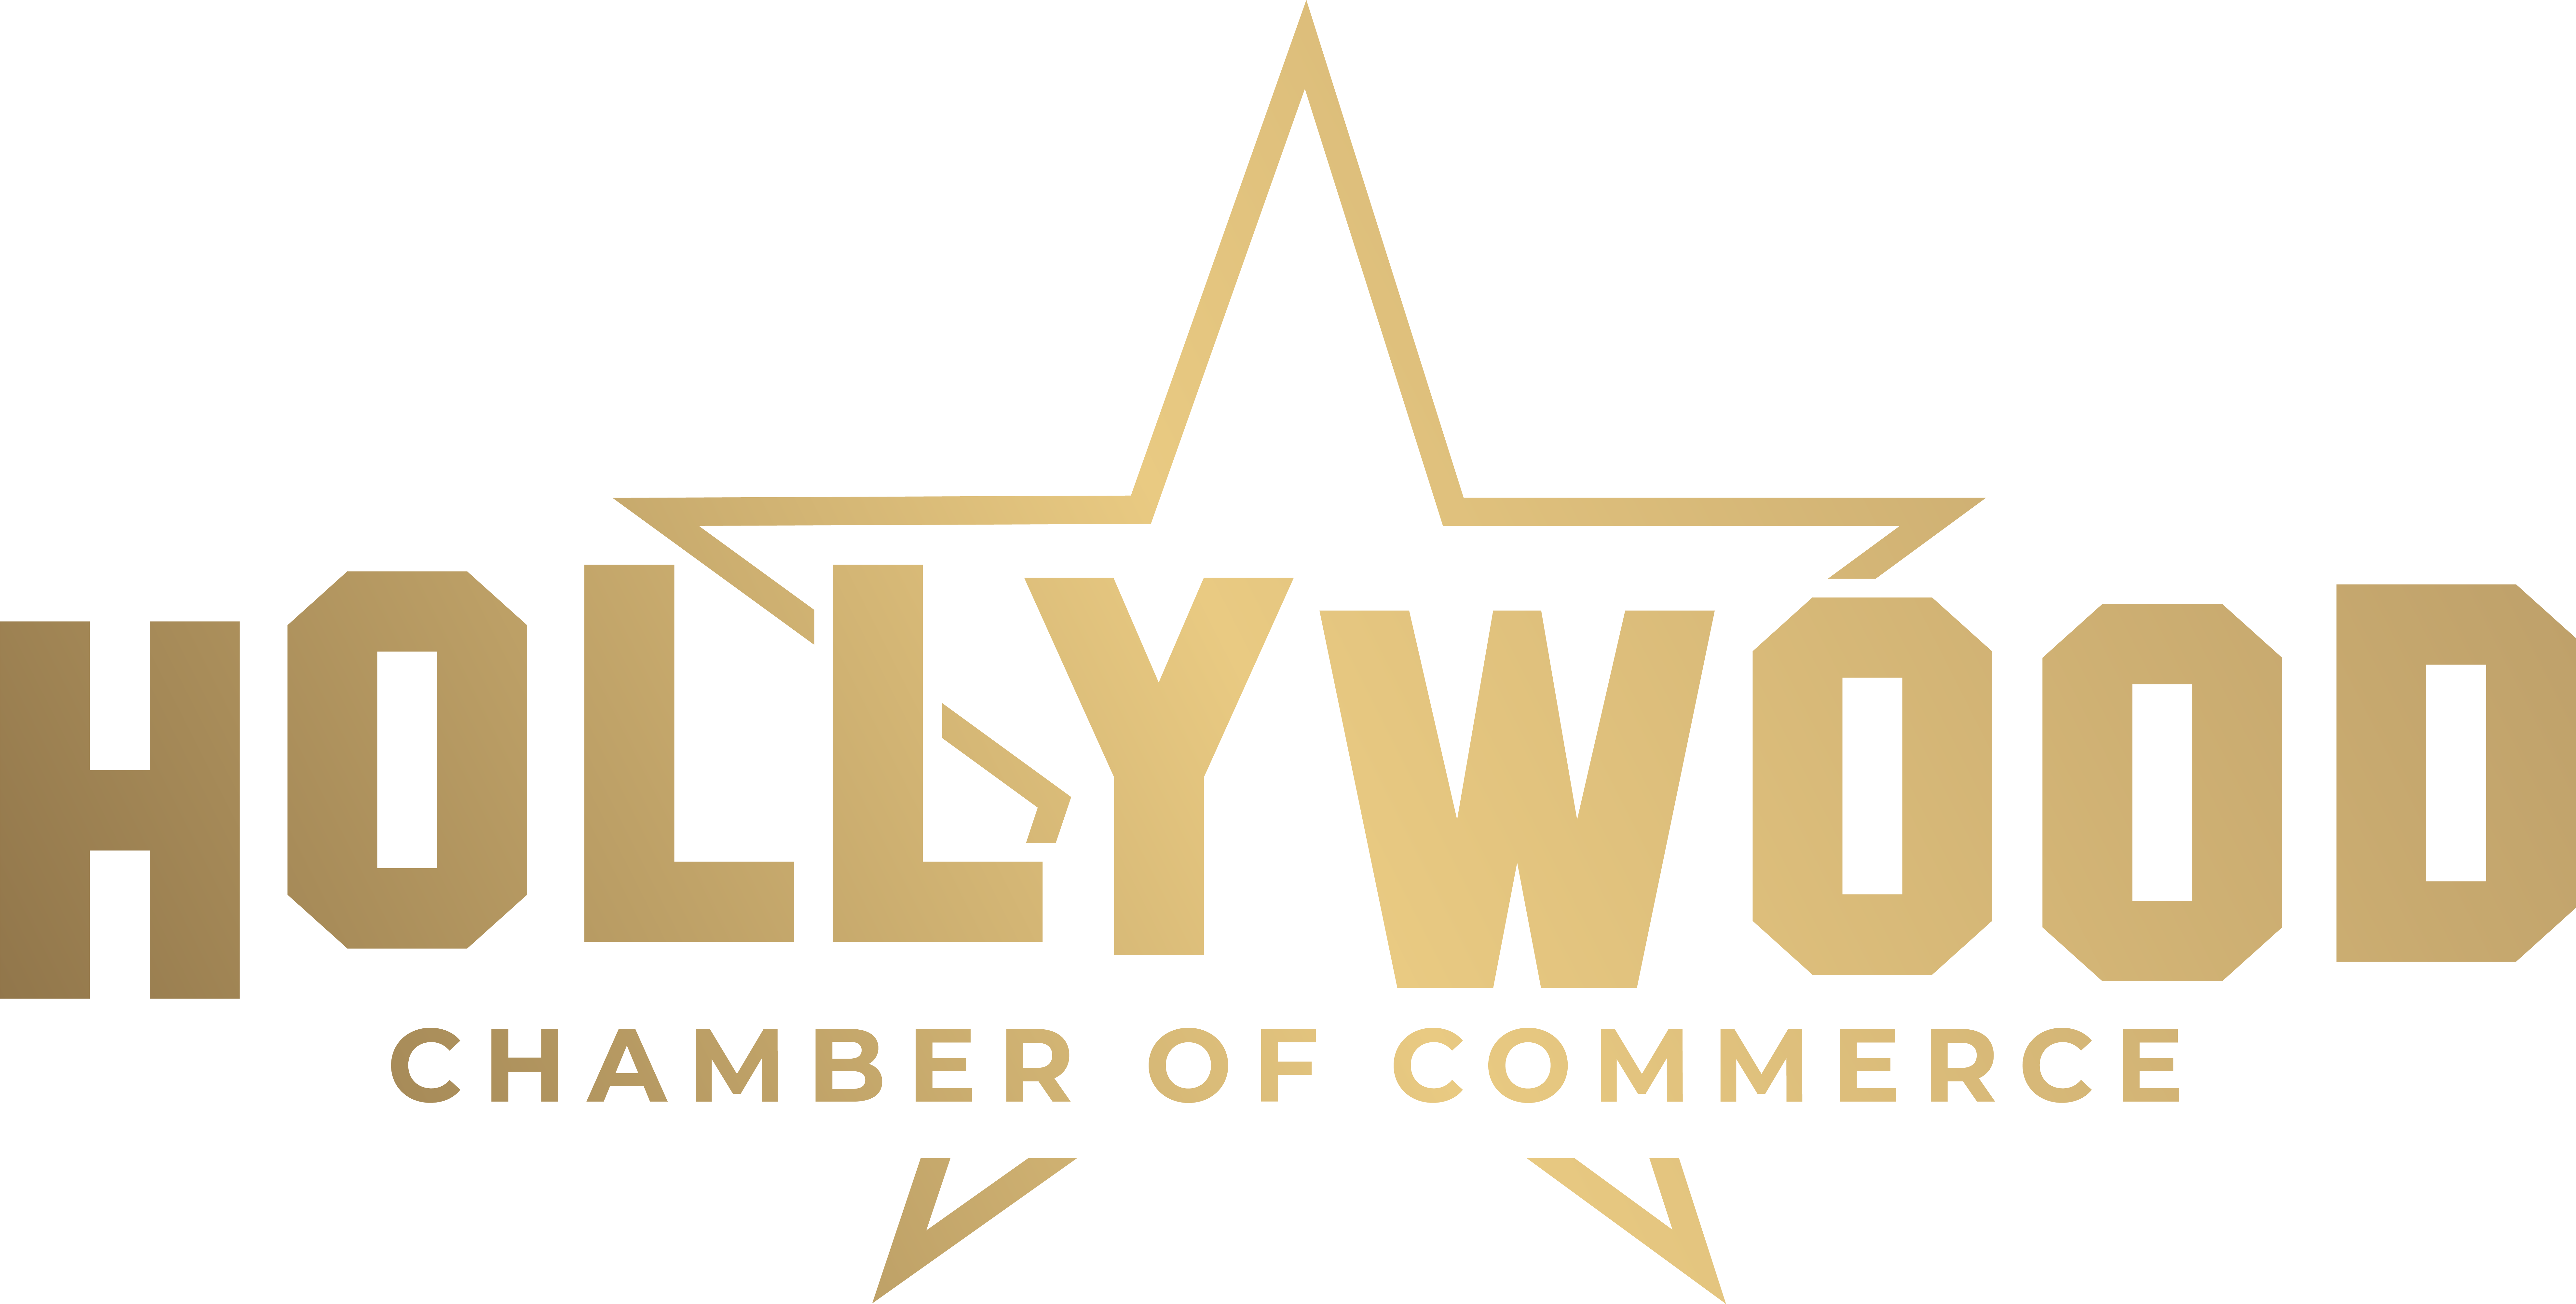 Hollywood Chamber of Commerce